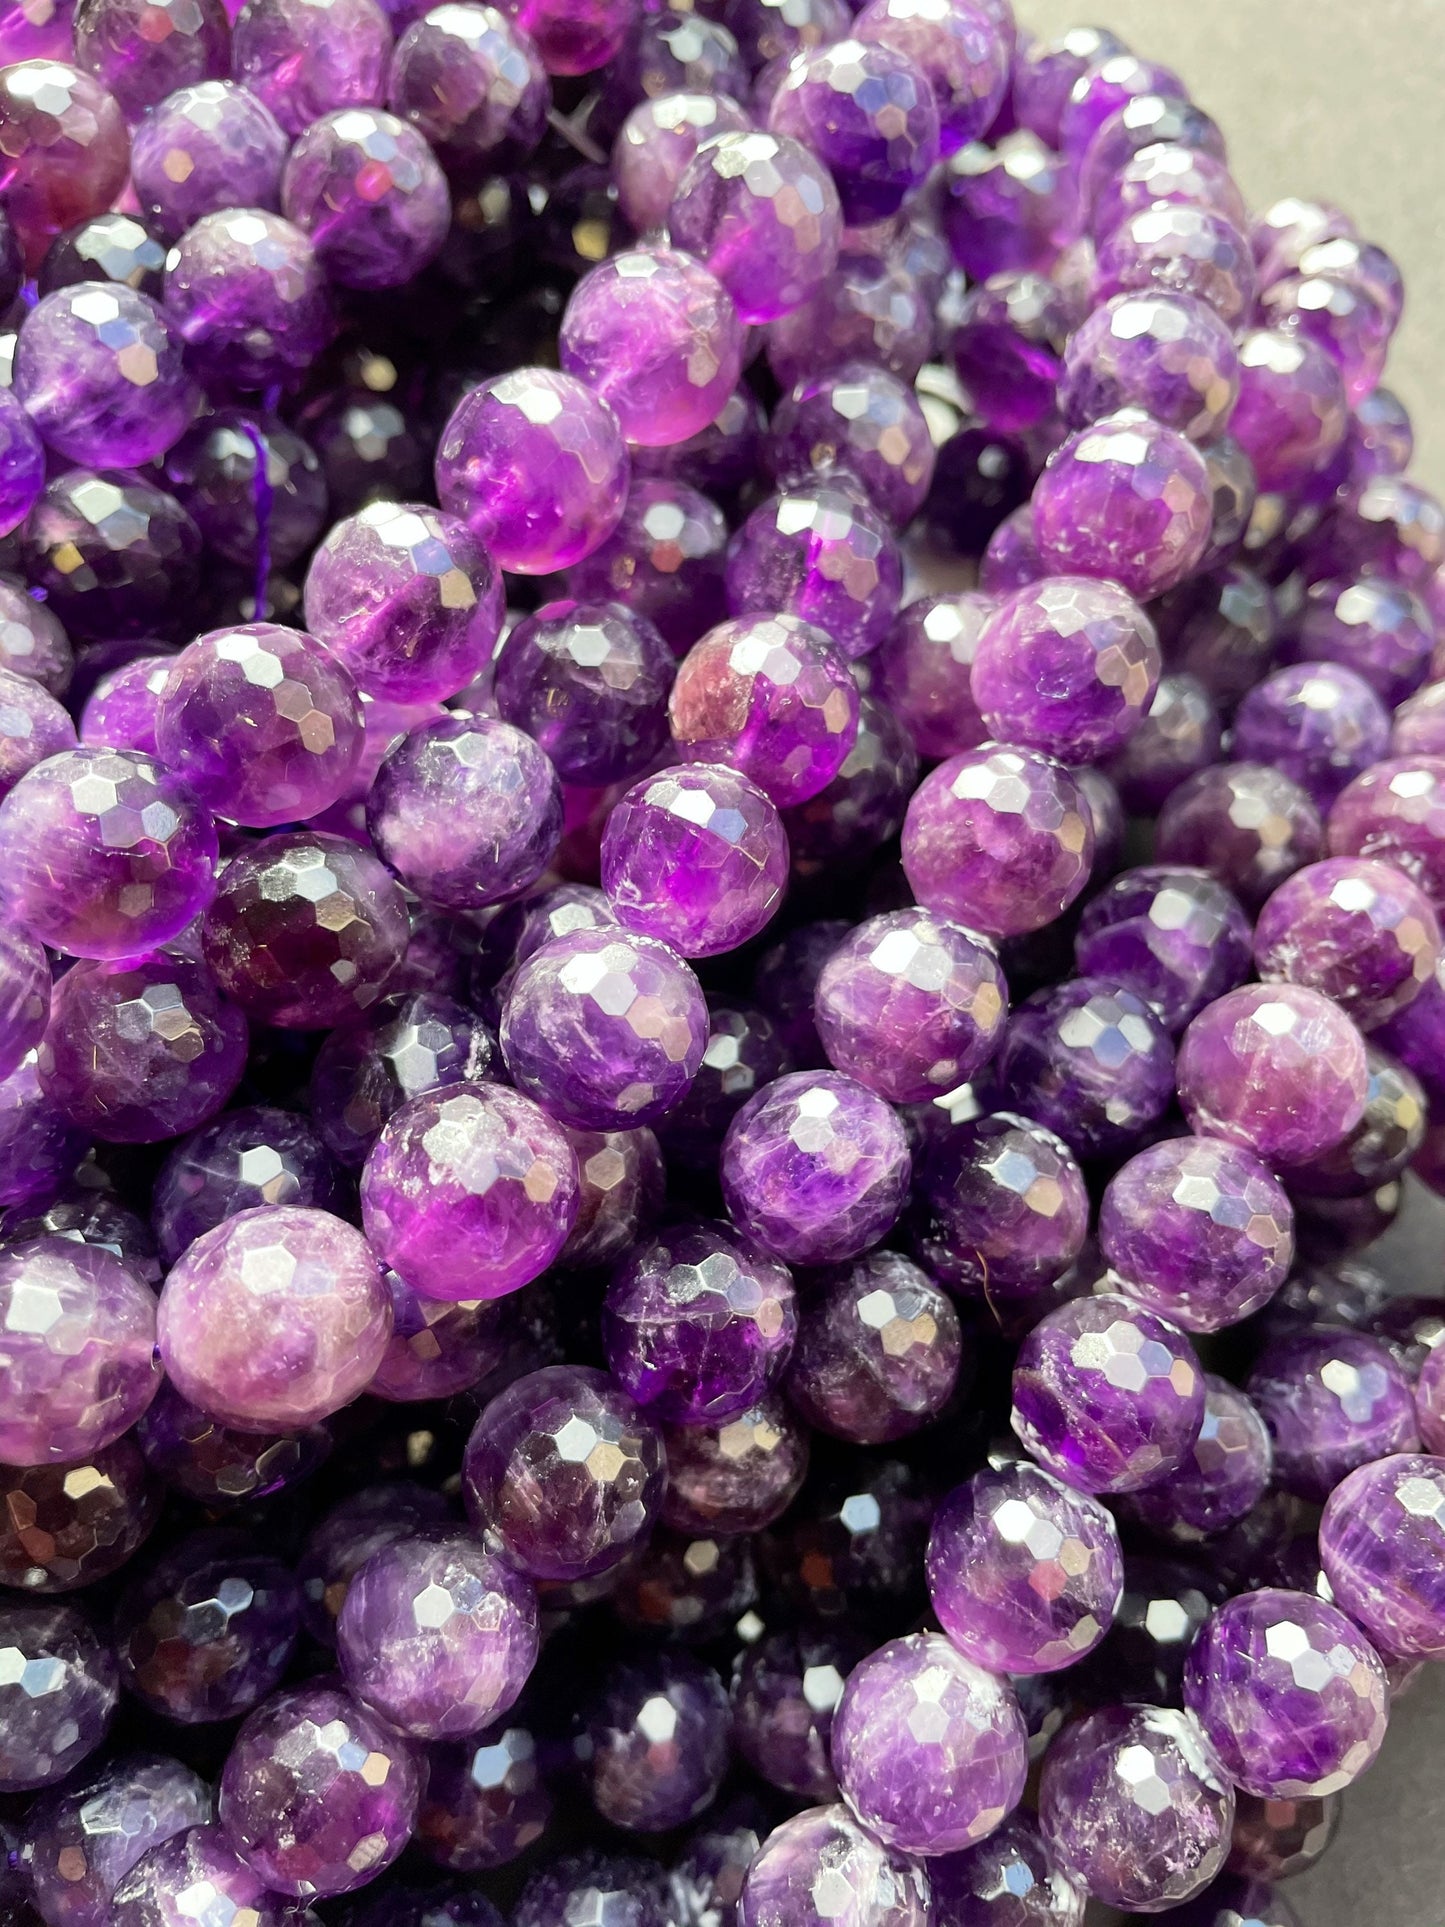 AAA Natural Amethyst Gemstone Bead Faceted 6mm 8mm 10mm 12mm Round Bead, Gorgeous Purple Color Amethyst Gemstone Bead